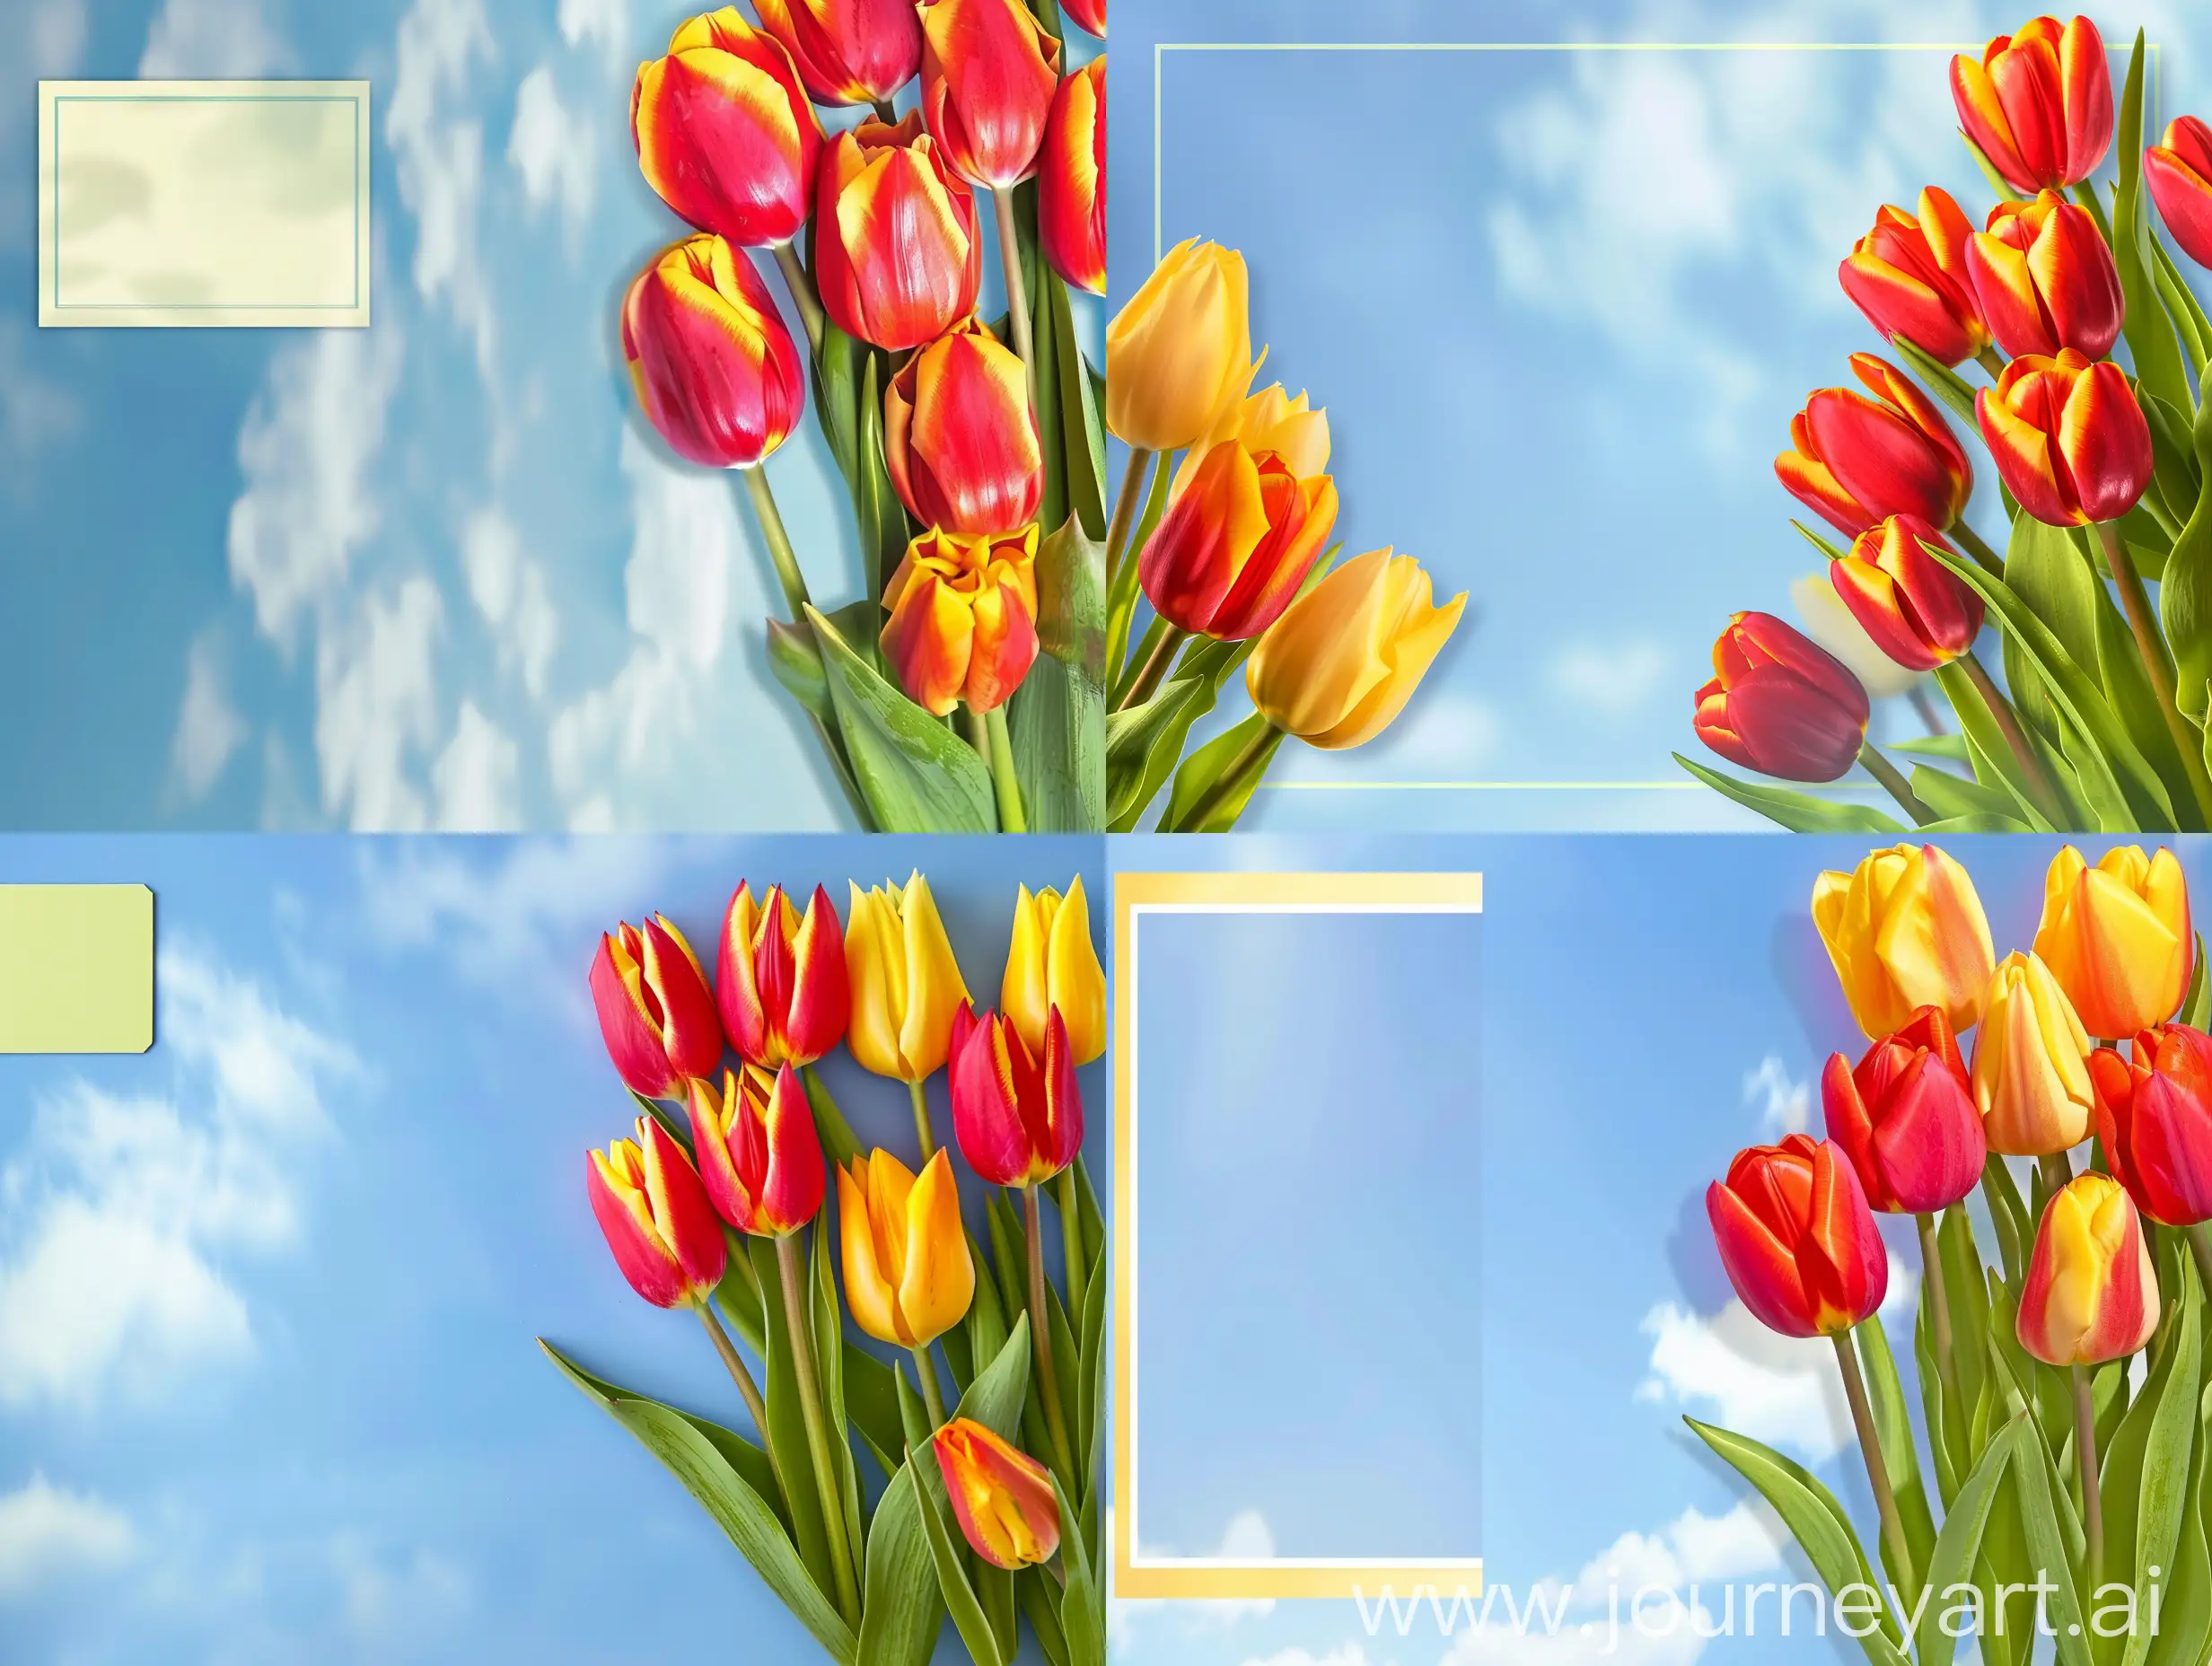 a spring flower postcard with red, yellow and orange tulips on the right side, blue sjy background and a place for text on the left